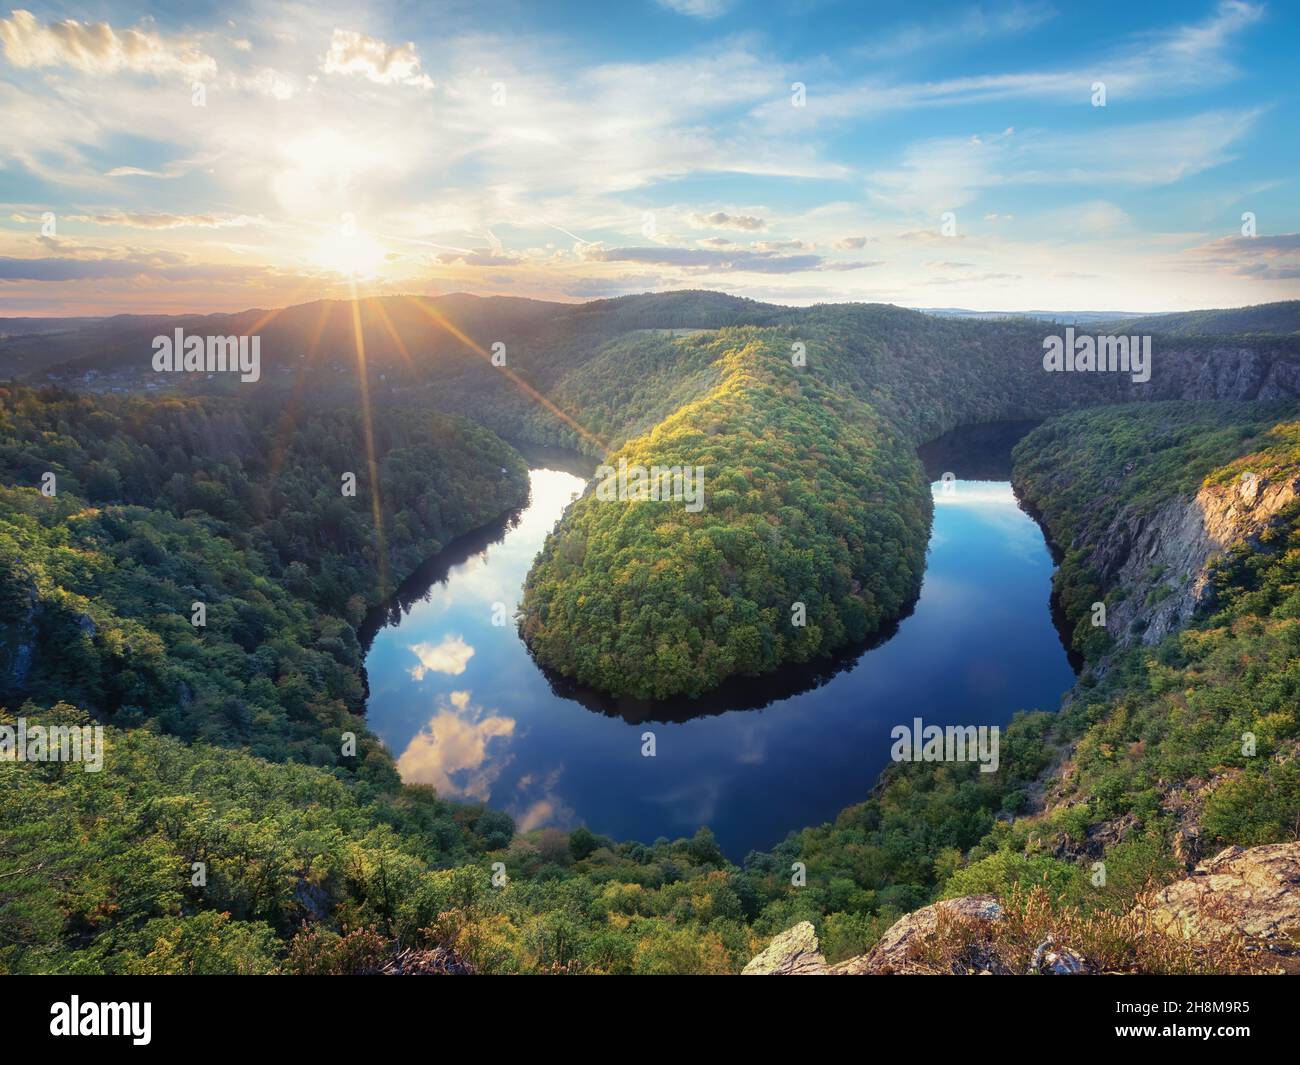 View of scenic bend of Vltava river from Vyhlidka Marenka viewpoint in Central Bohemian Region, Czechia Stock Photo